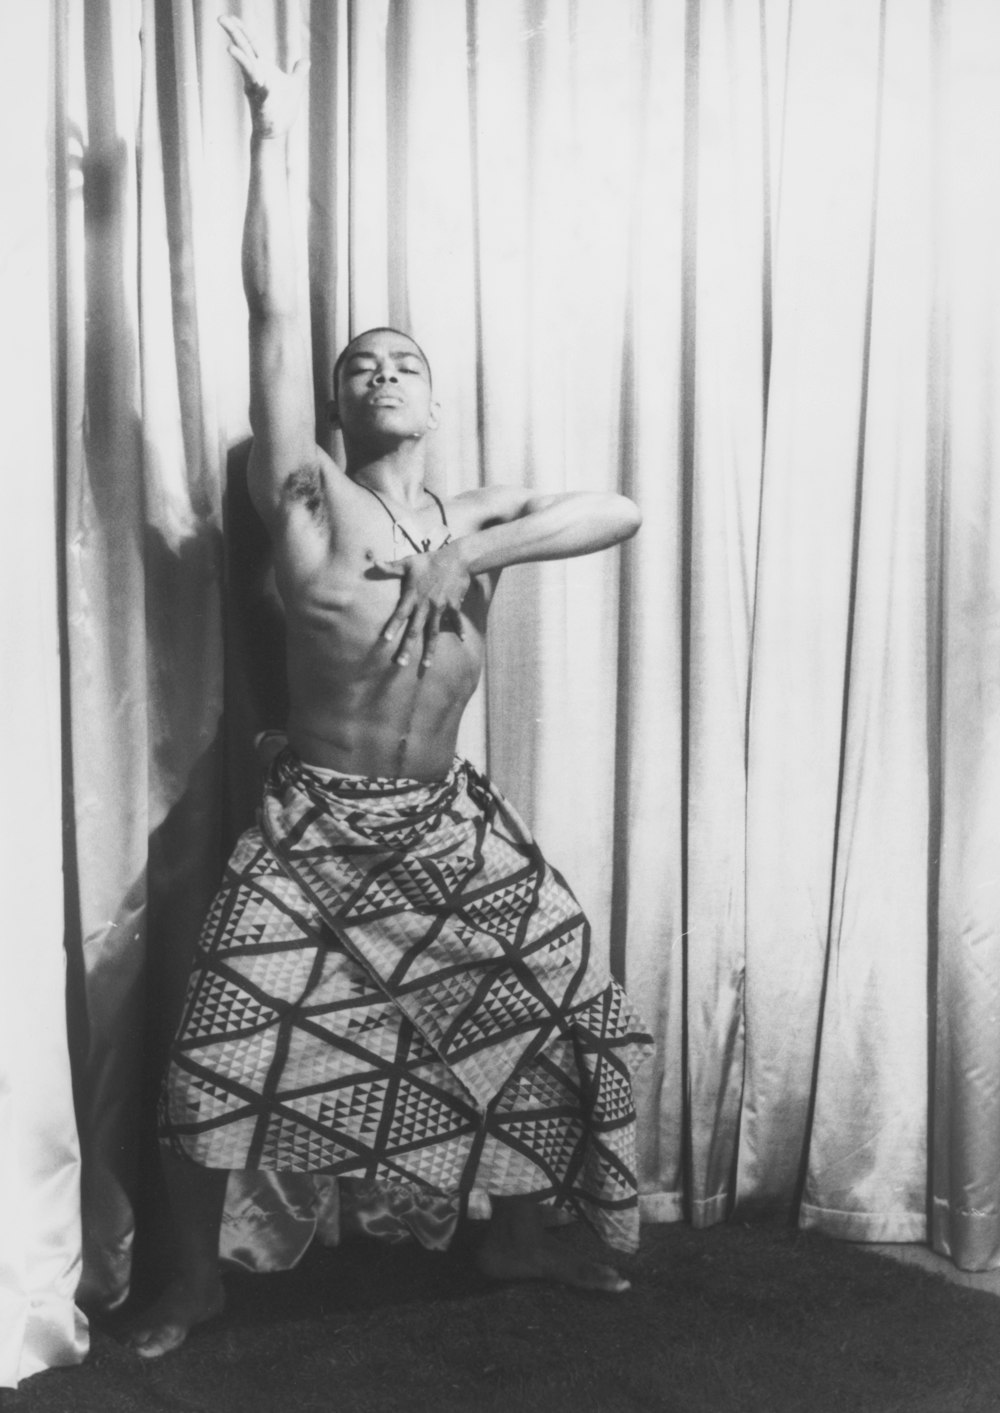 Alvin Ailey posed in patterned sarong